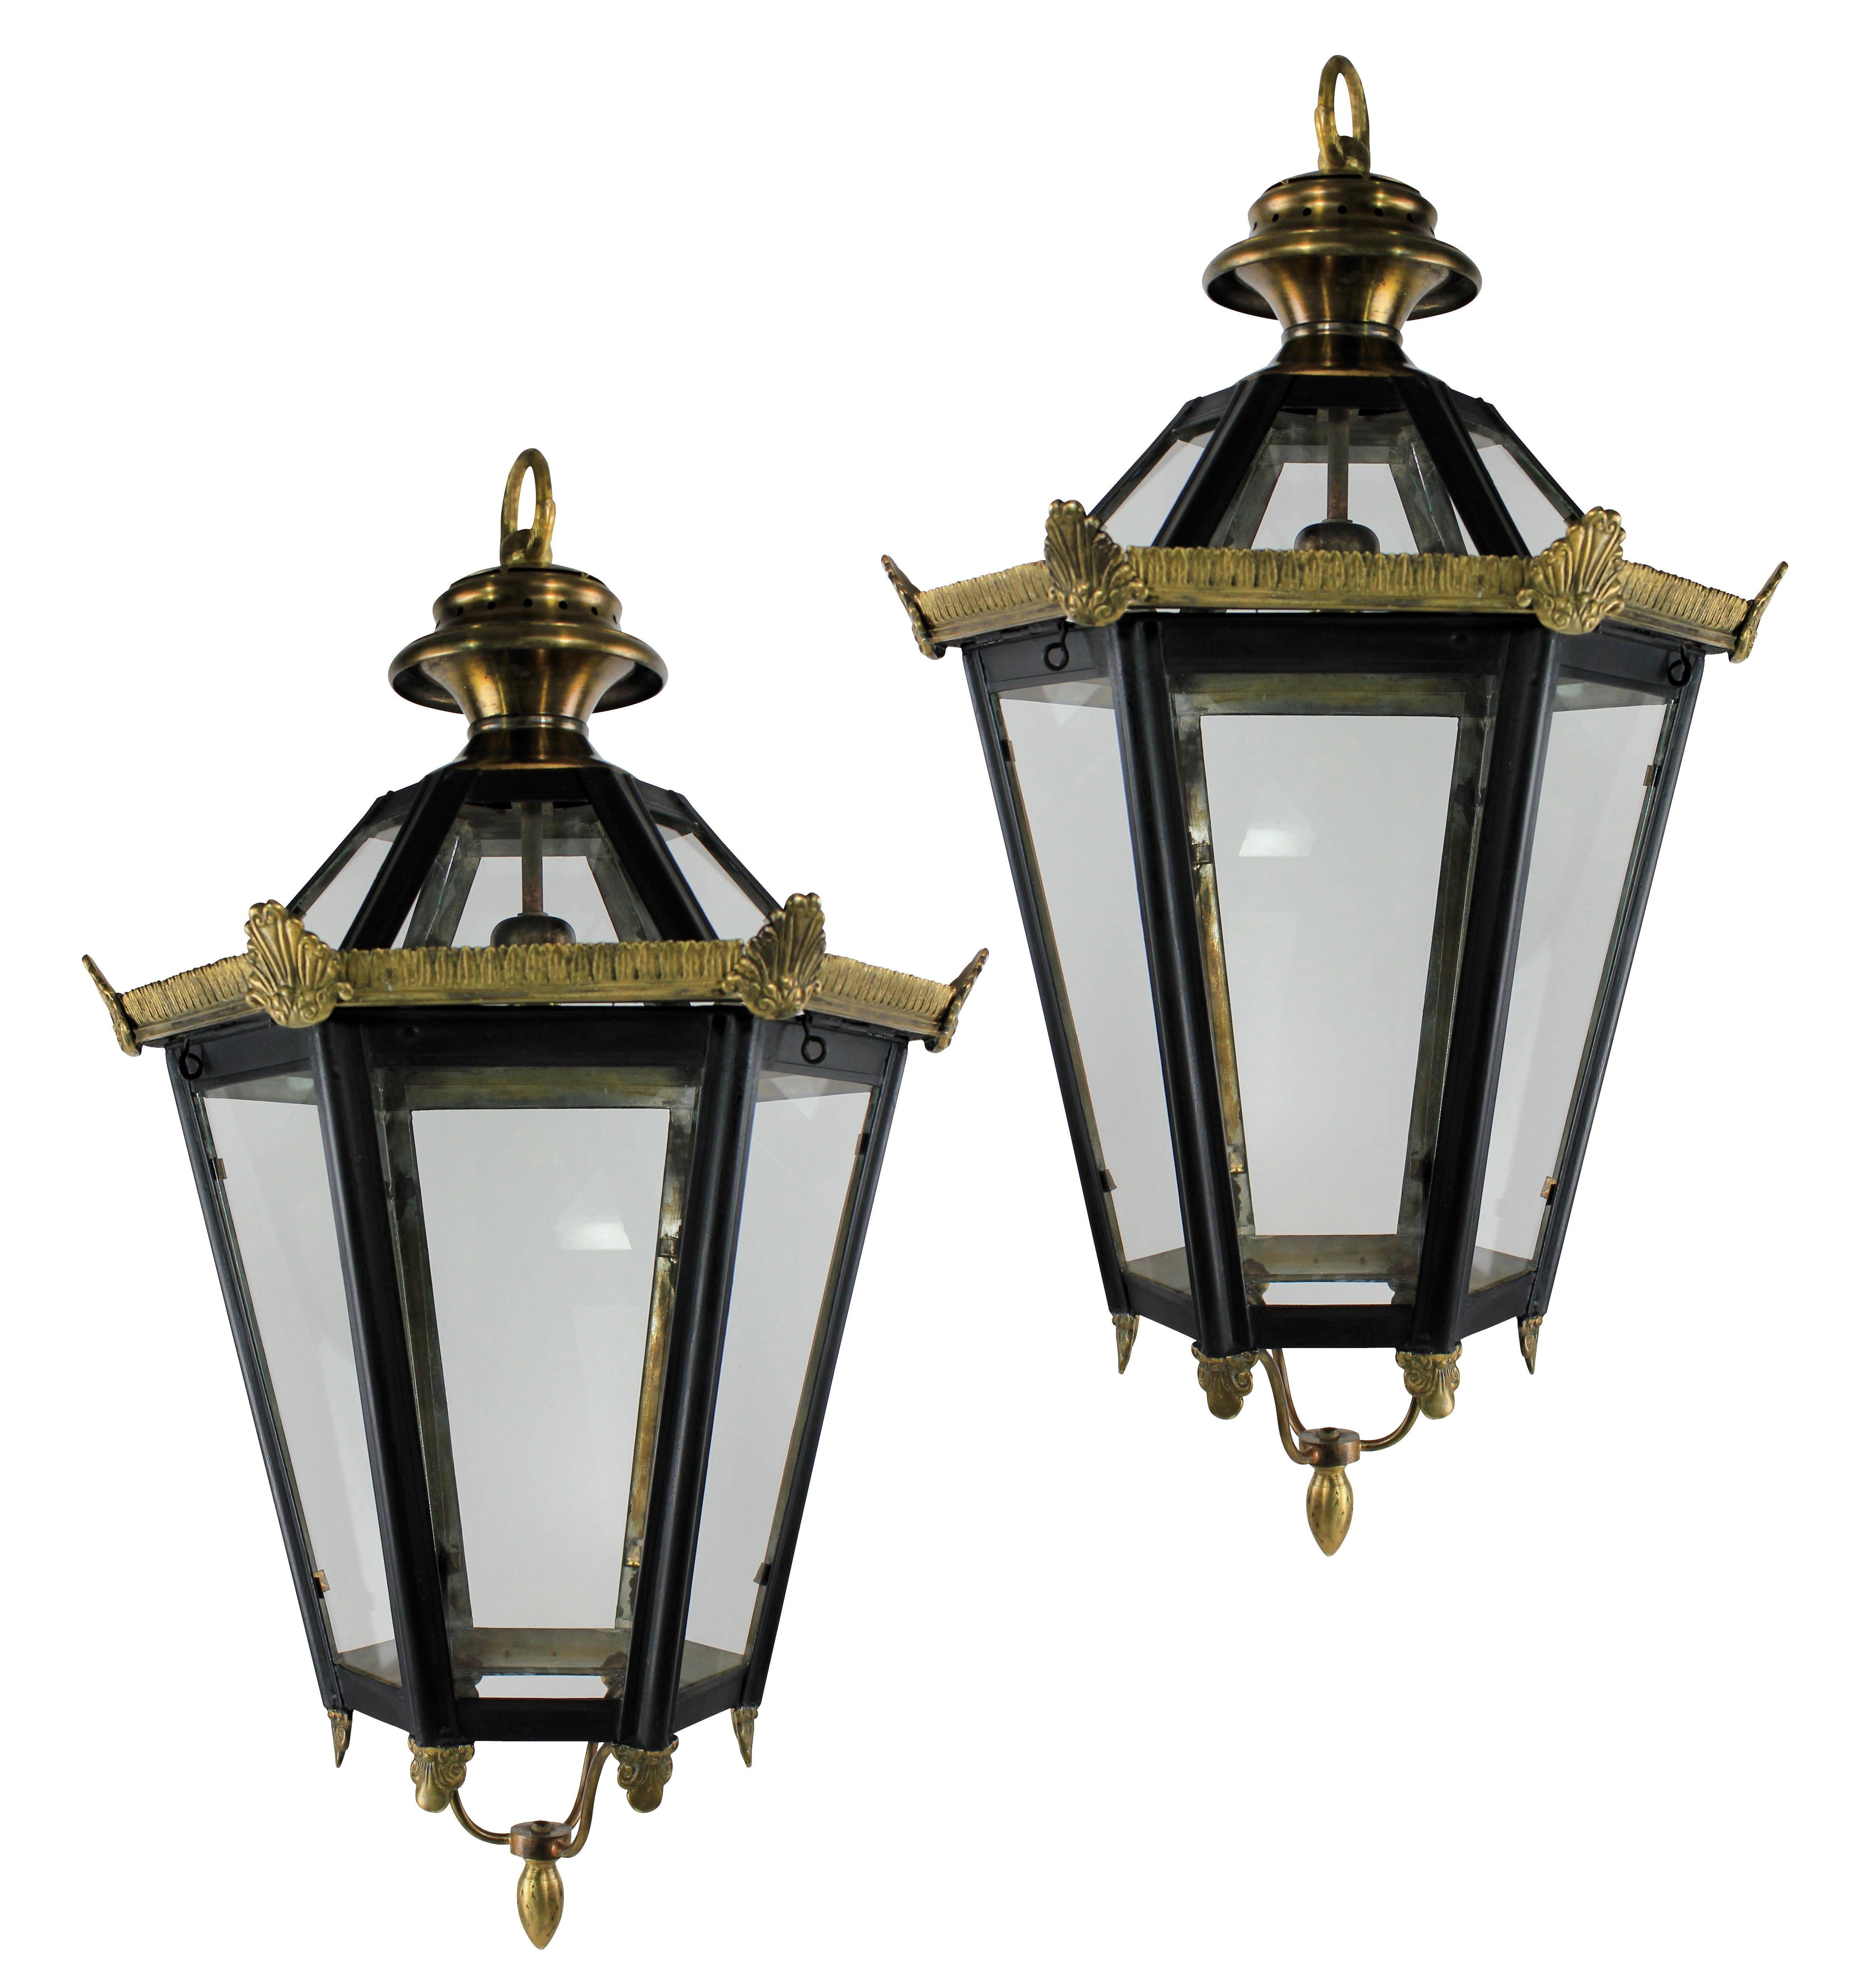 Contemporary Pair of English Tole Hanging Lanterns